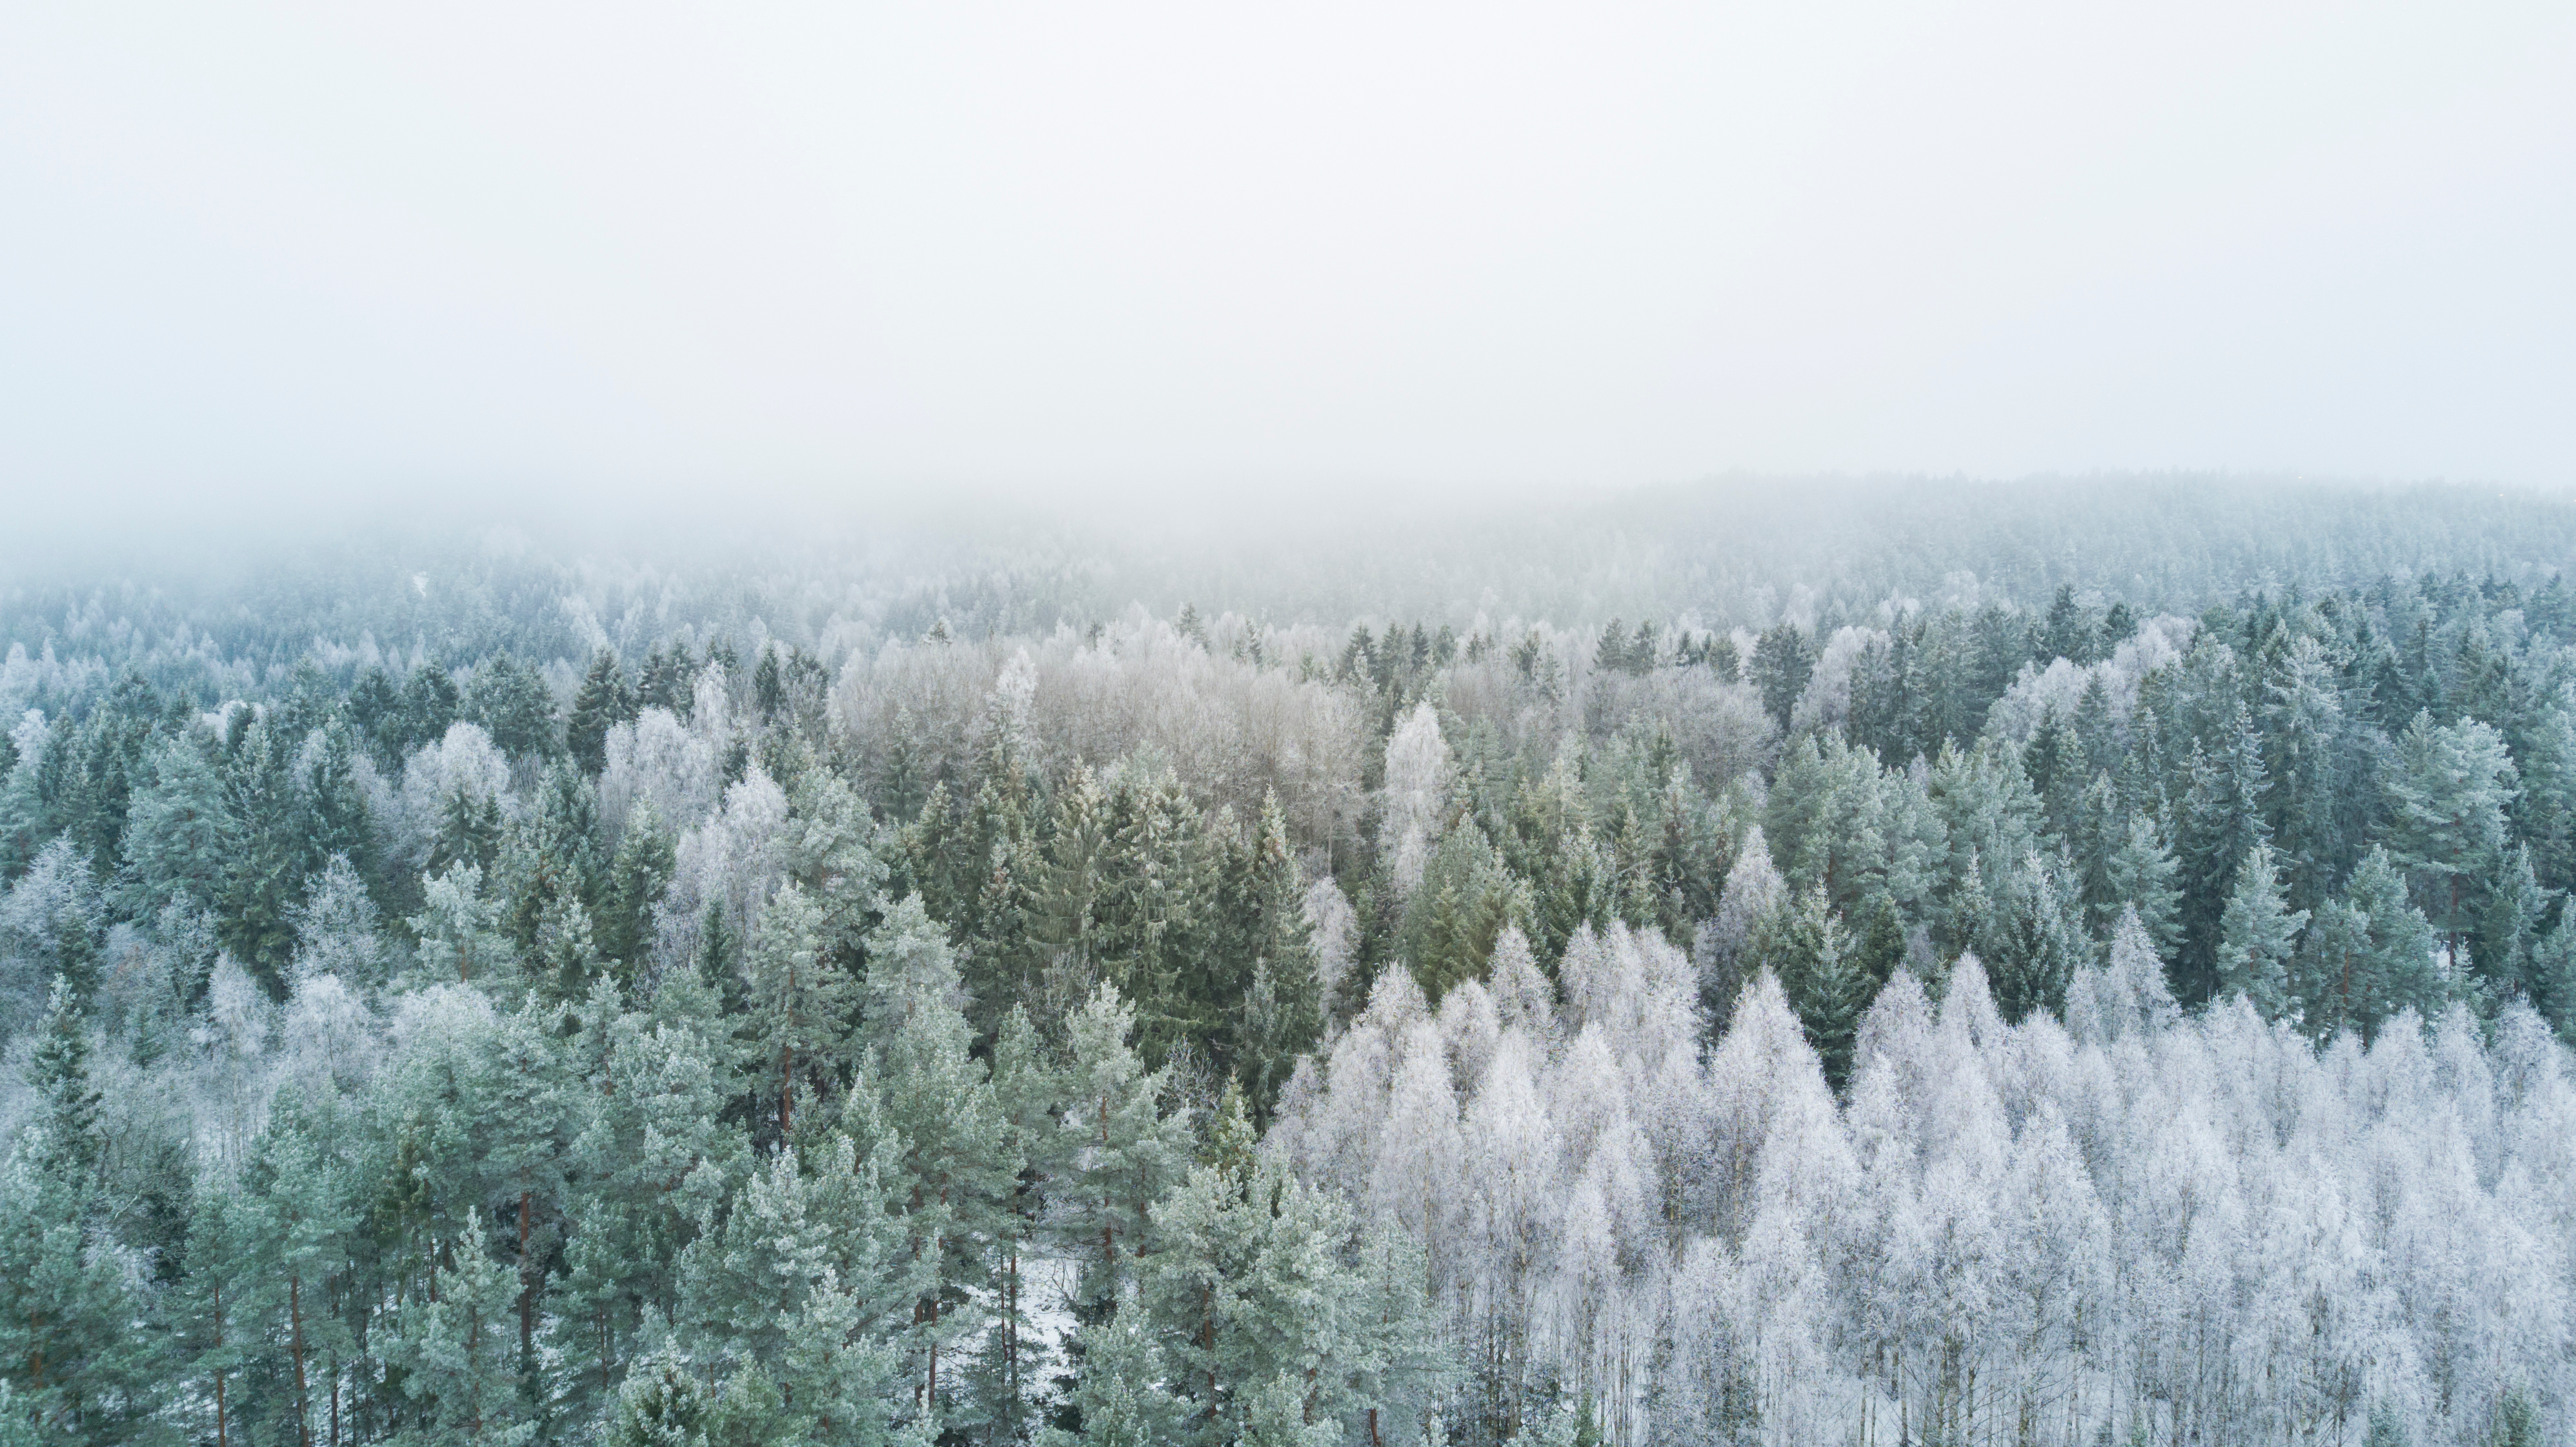 Frost with fog in the spruce forest